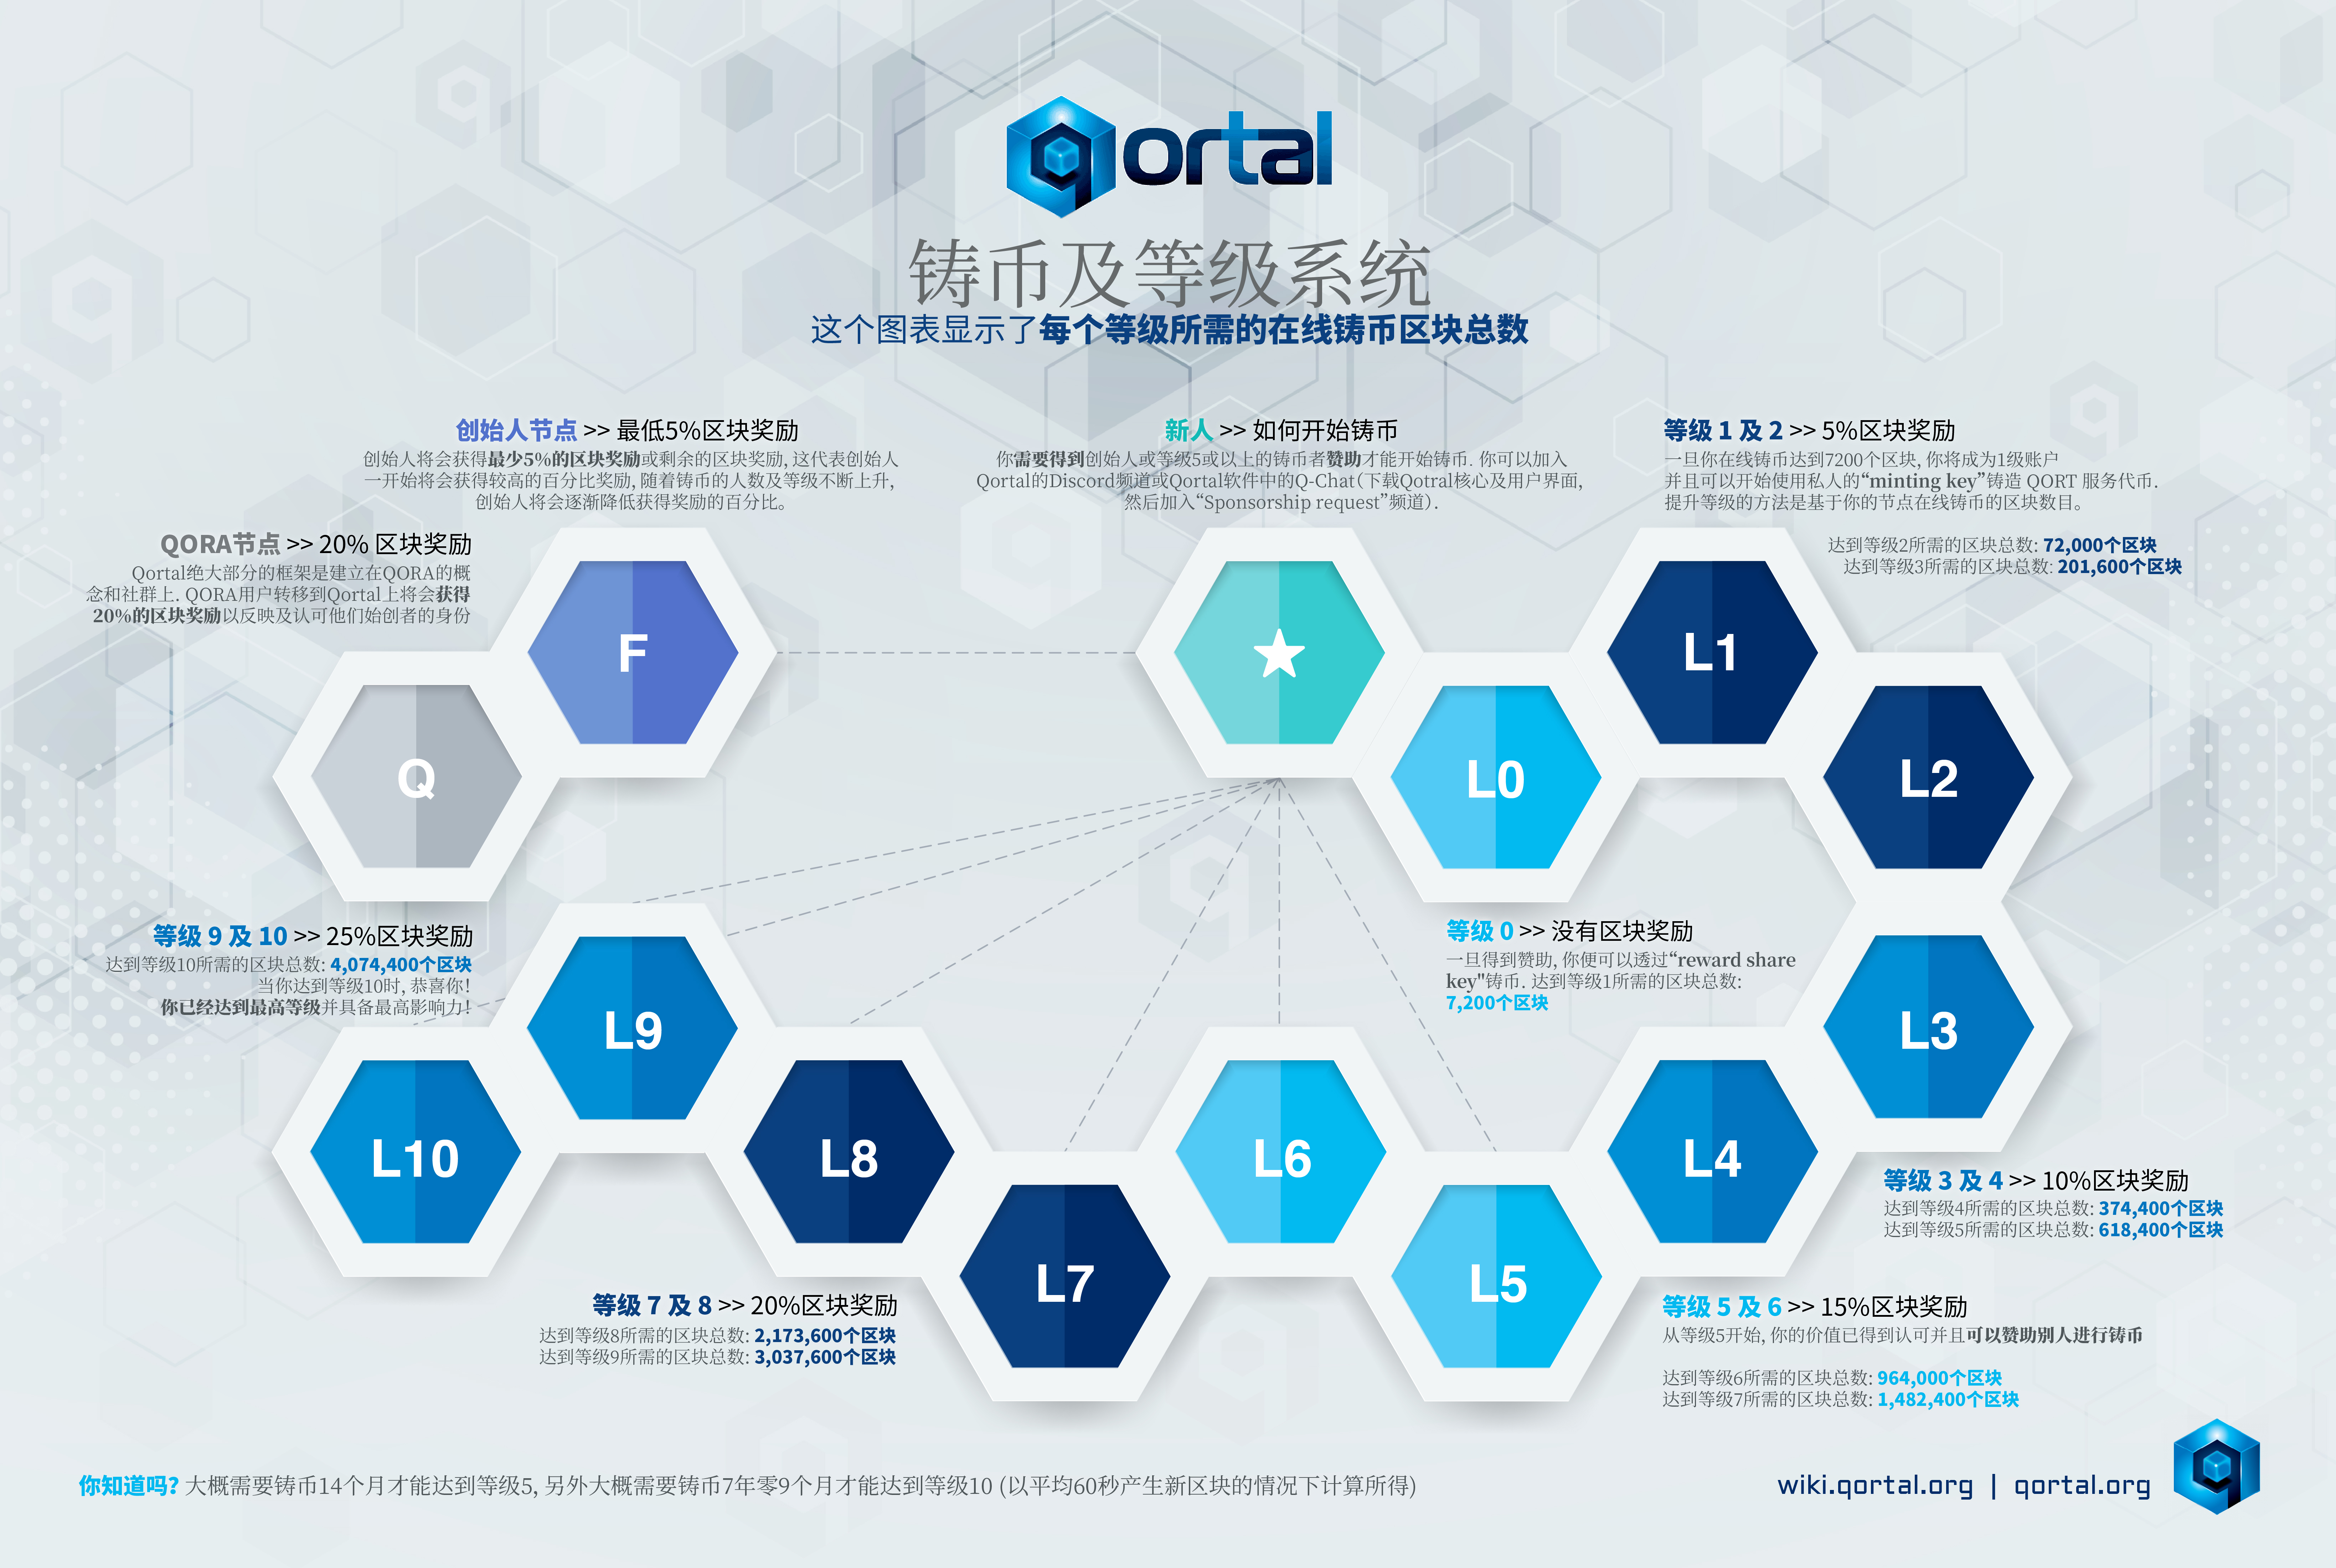 Qortal_minting_and_leveling_2020_Simple_Chinese